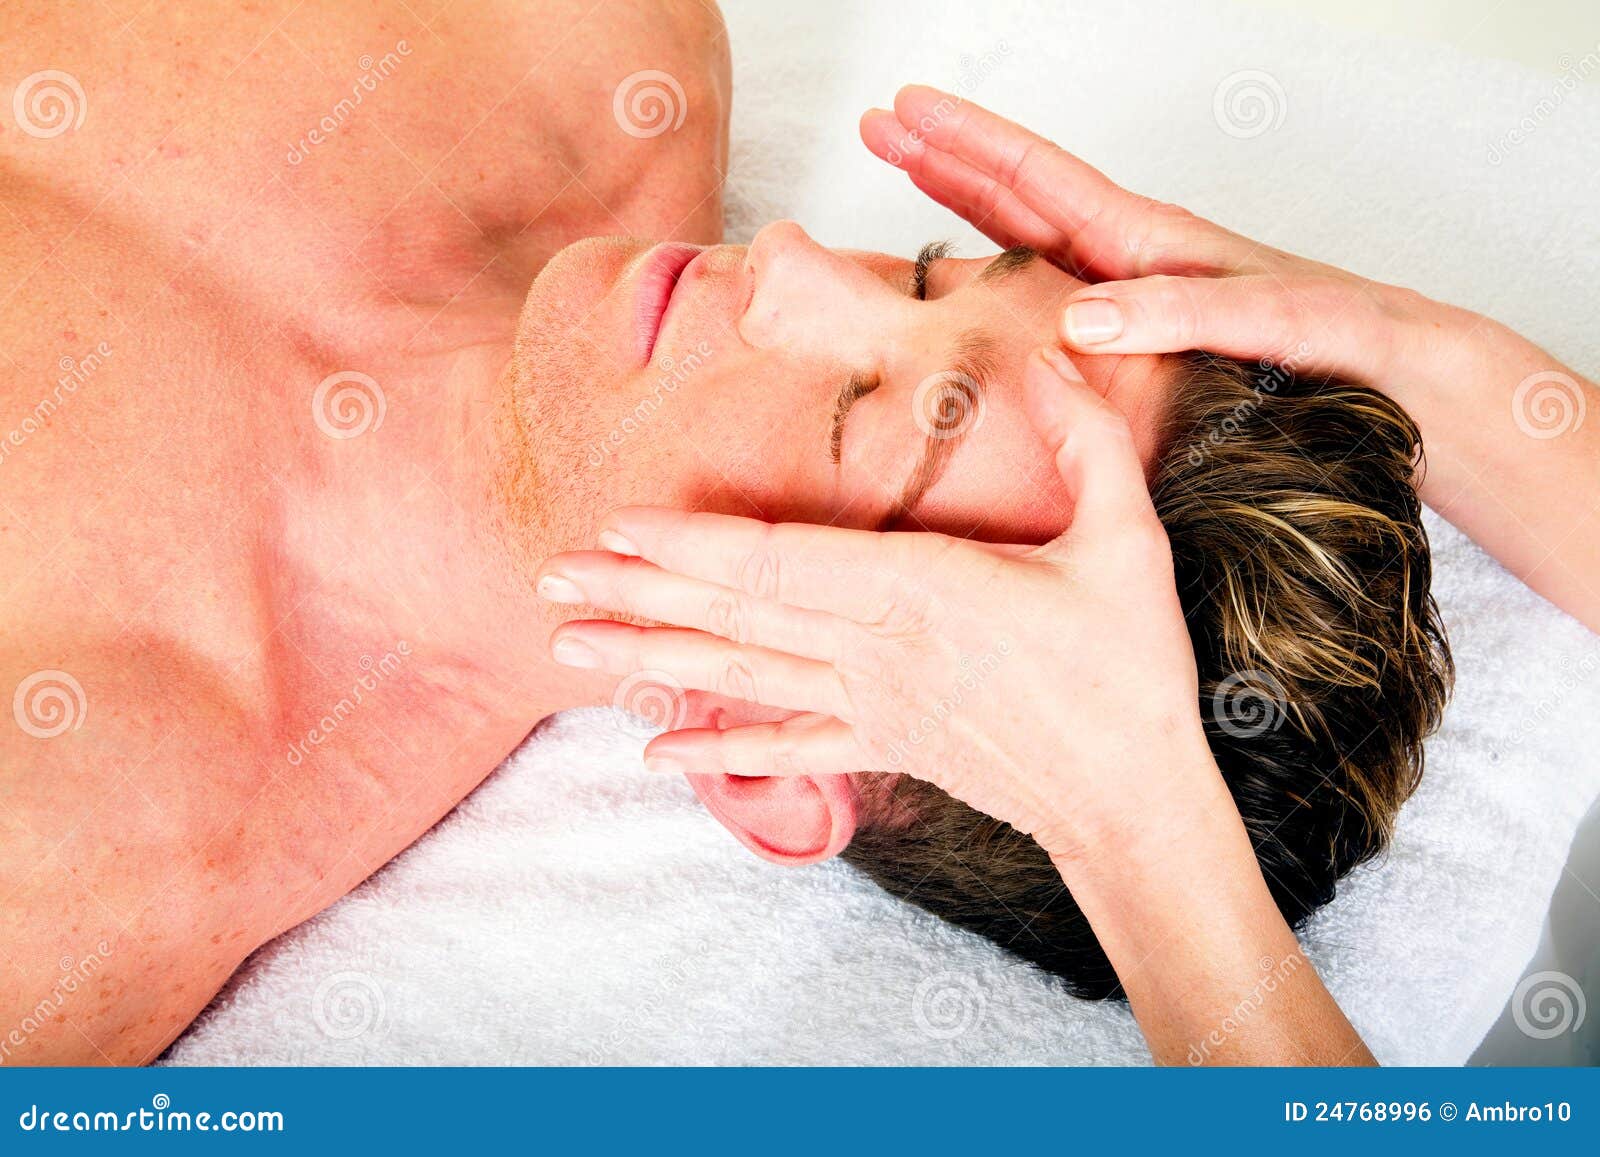 Young Man Receives A Face Massage Royalty Free Stock Image Image